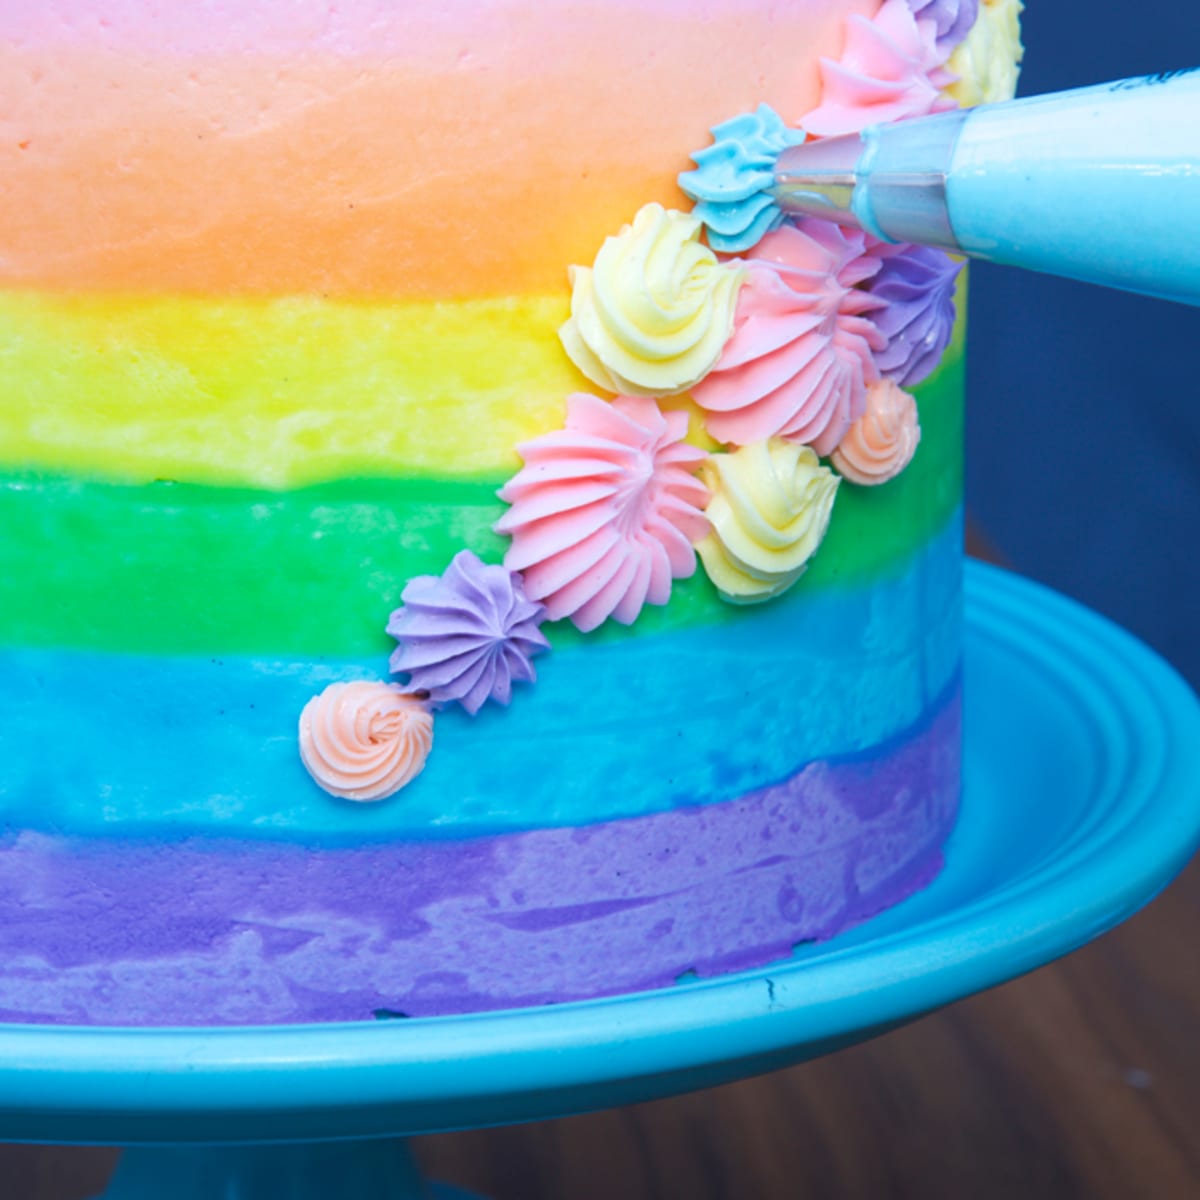 How to Make an Ombré Rainbow Cake - Cupcakes & Cashmere